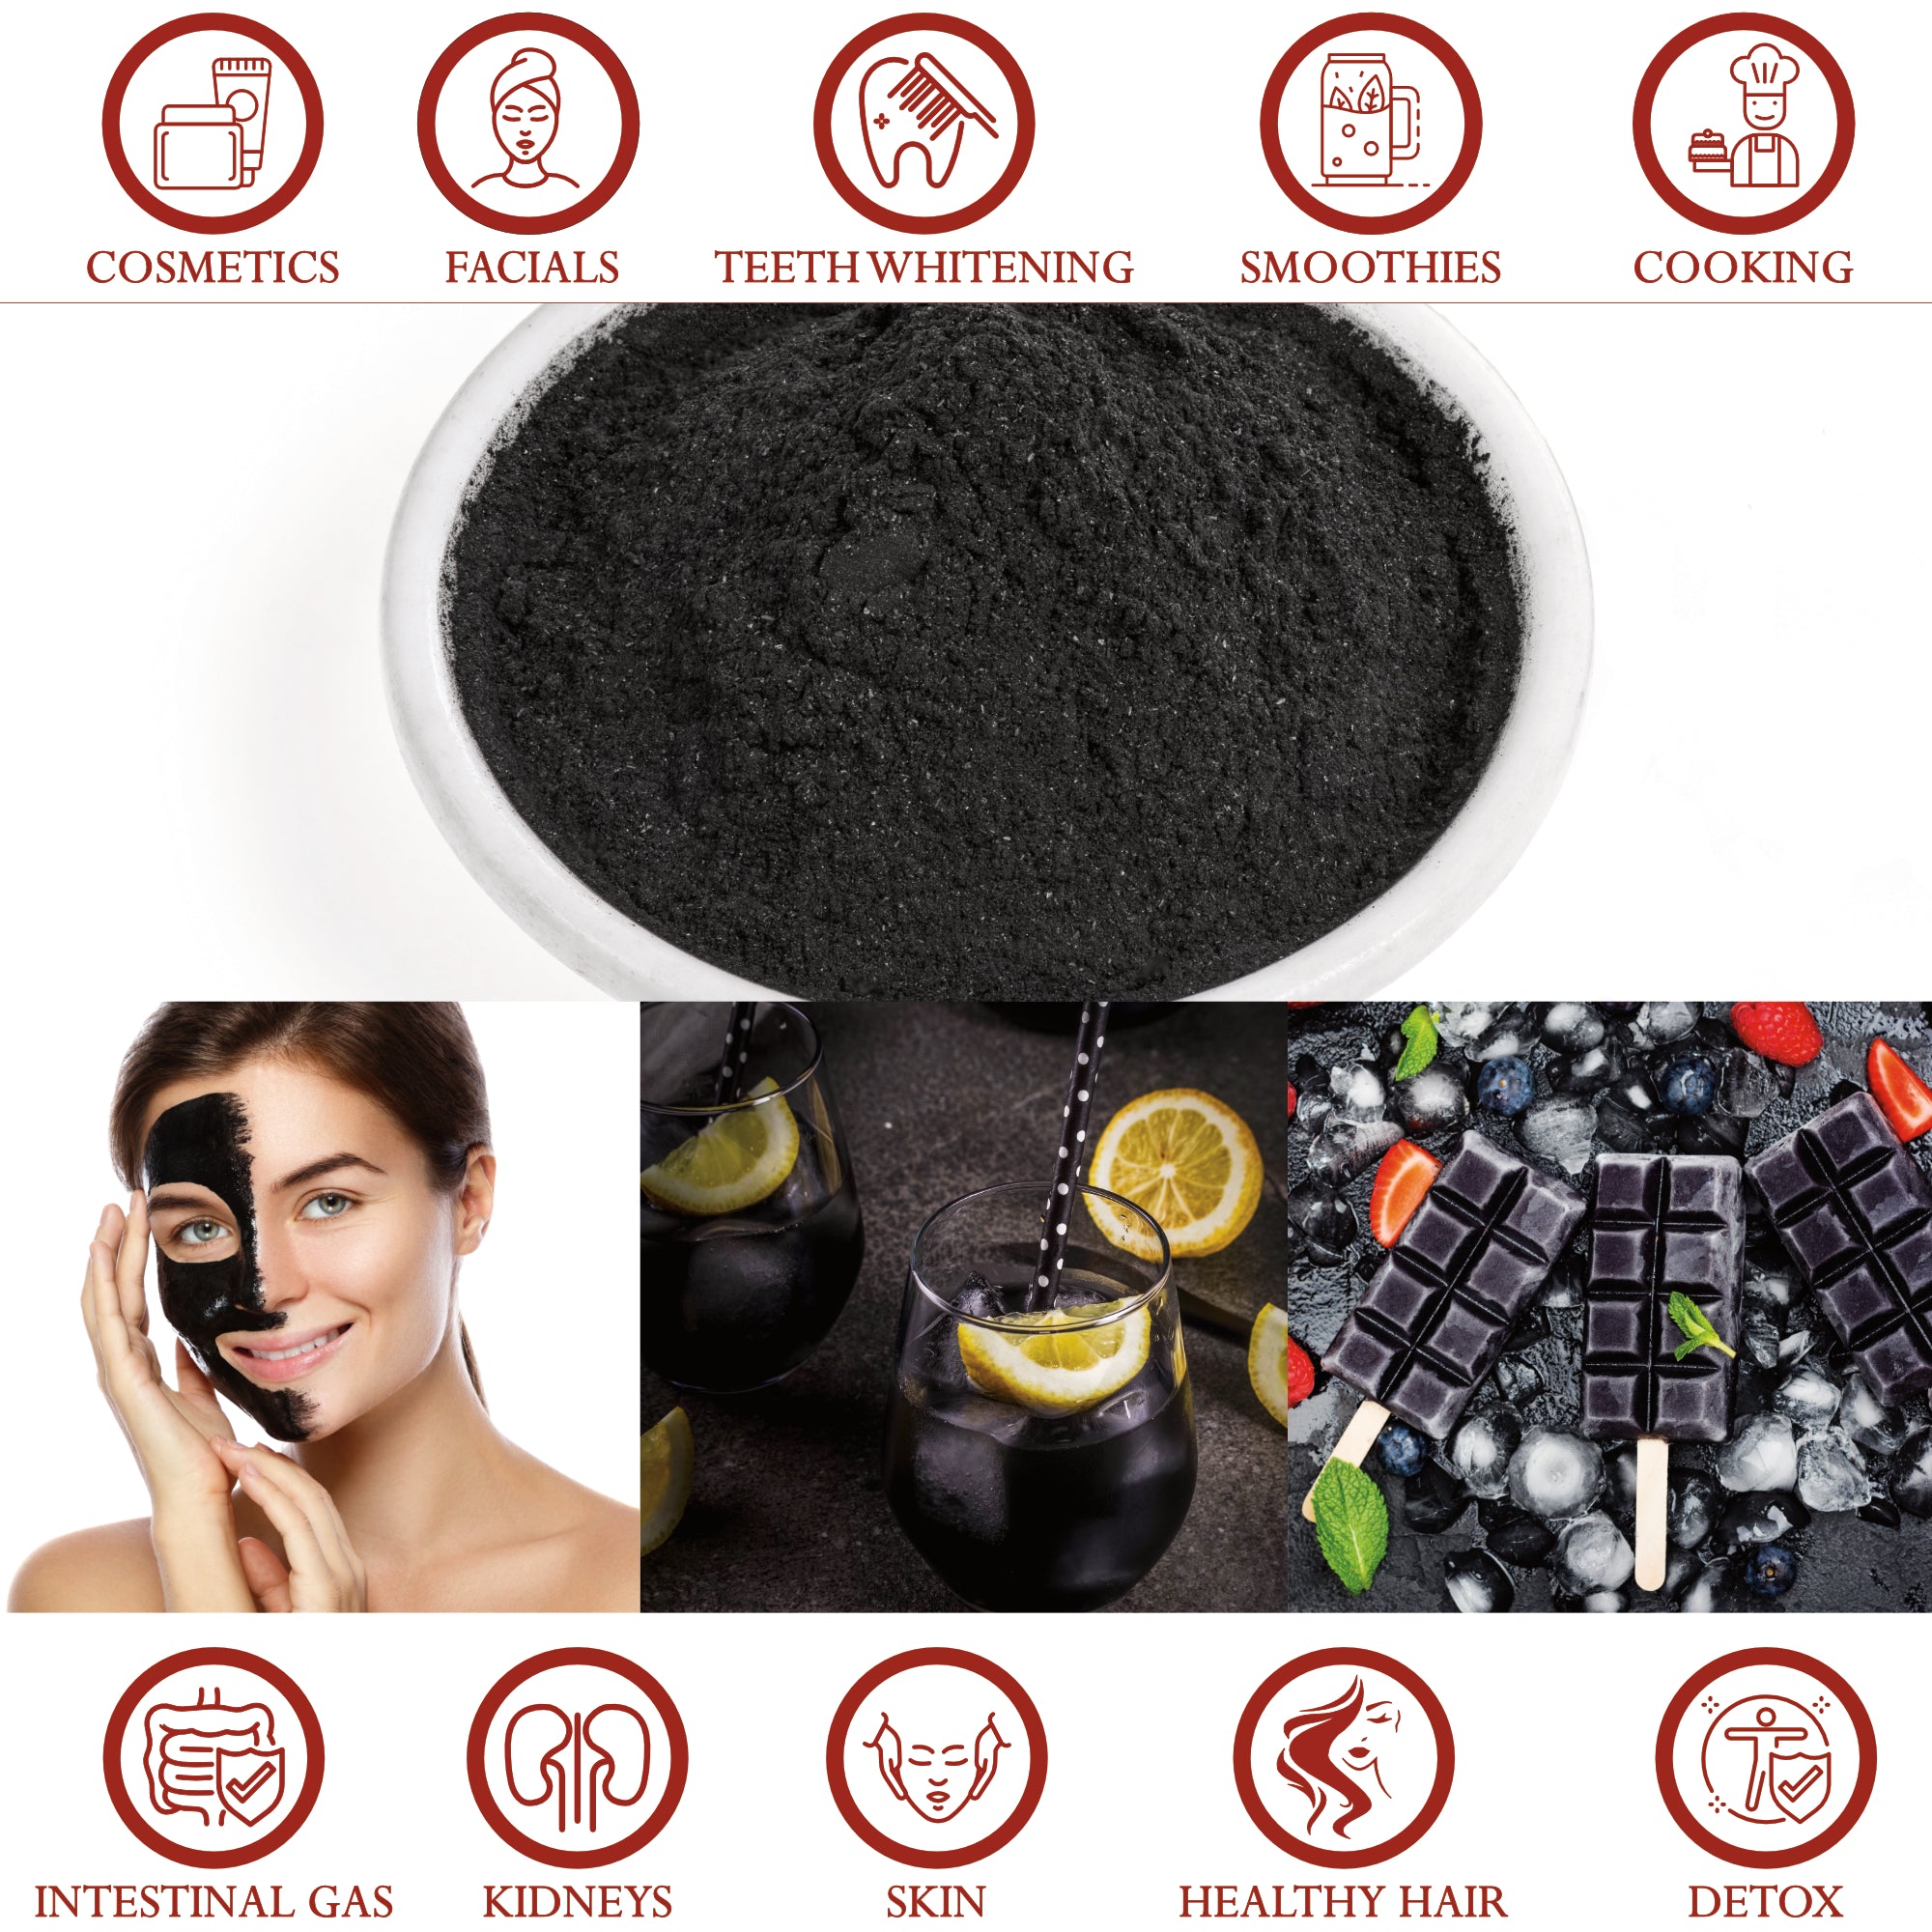 Activated Charcoal - 454g (1 lb) from Coconut Shell, Fine Powder, Pure No Fillers | Foothills Naturals Canada | Ancient Herbs for Modern Use